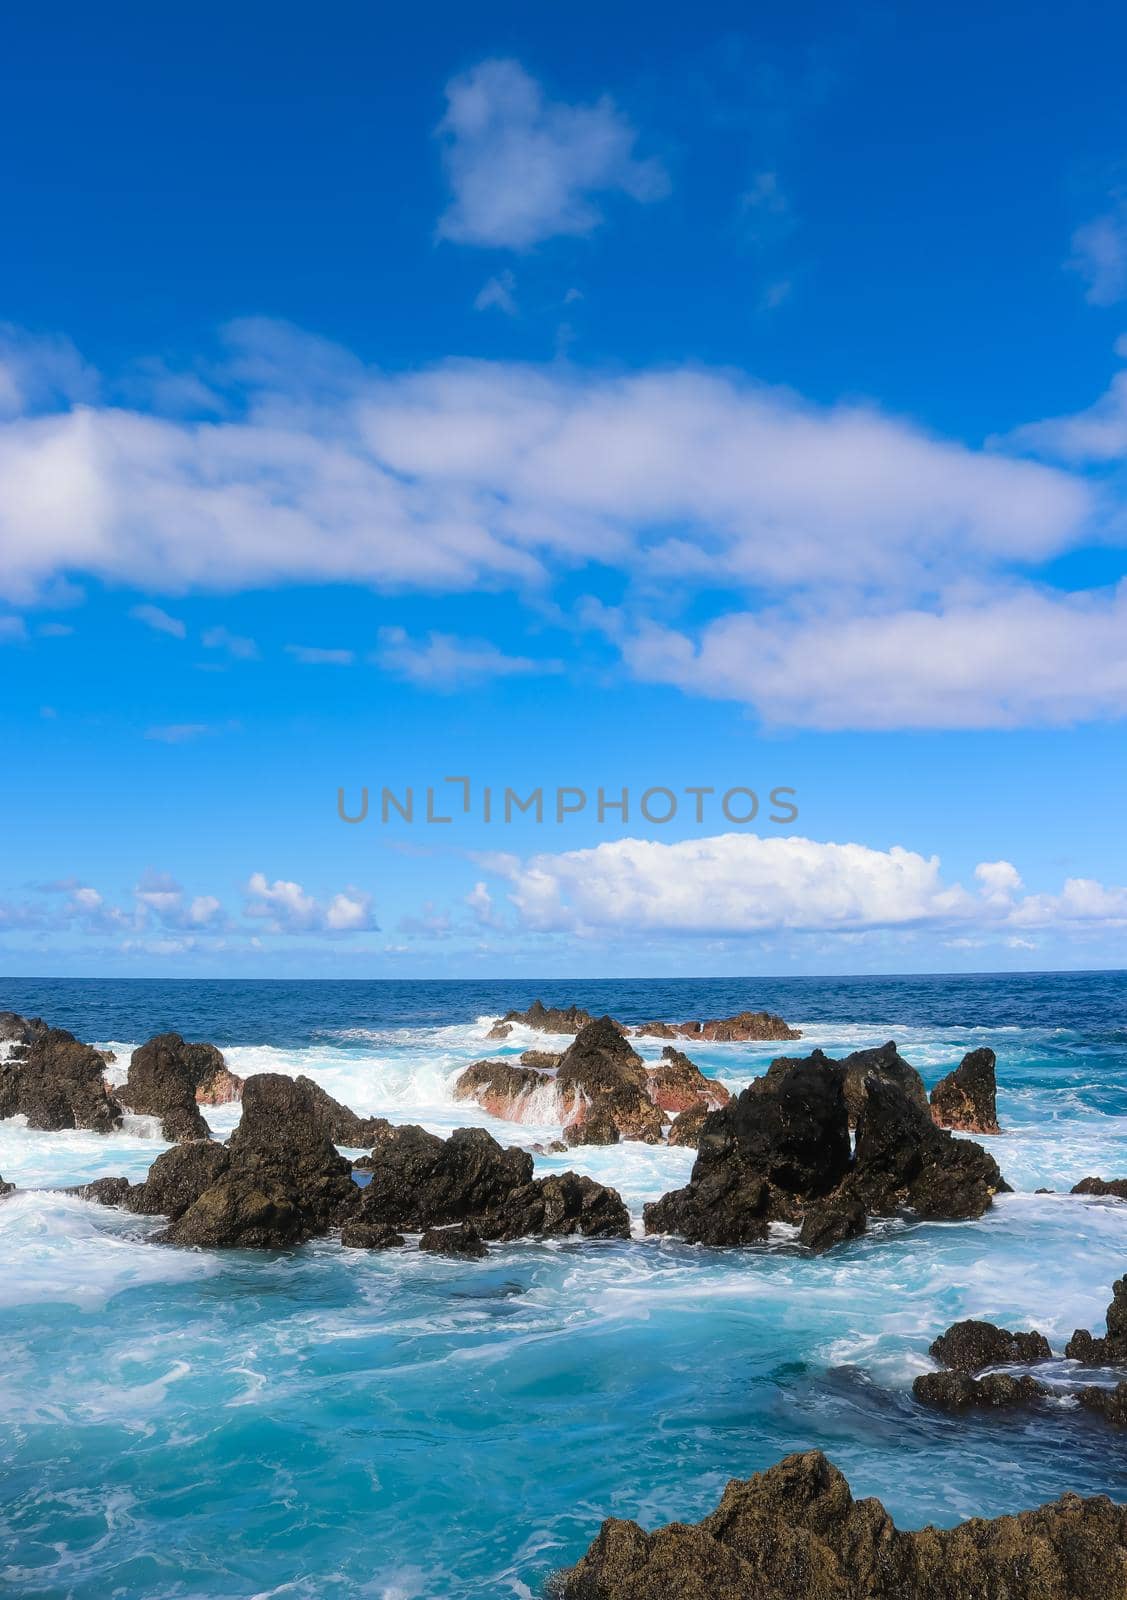 Waves crashing among the rocks of the turquoise water rock pools of the island of Madeira, Portugal. High quality photo.